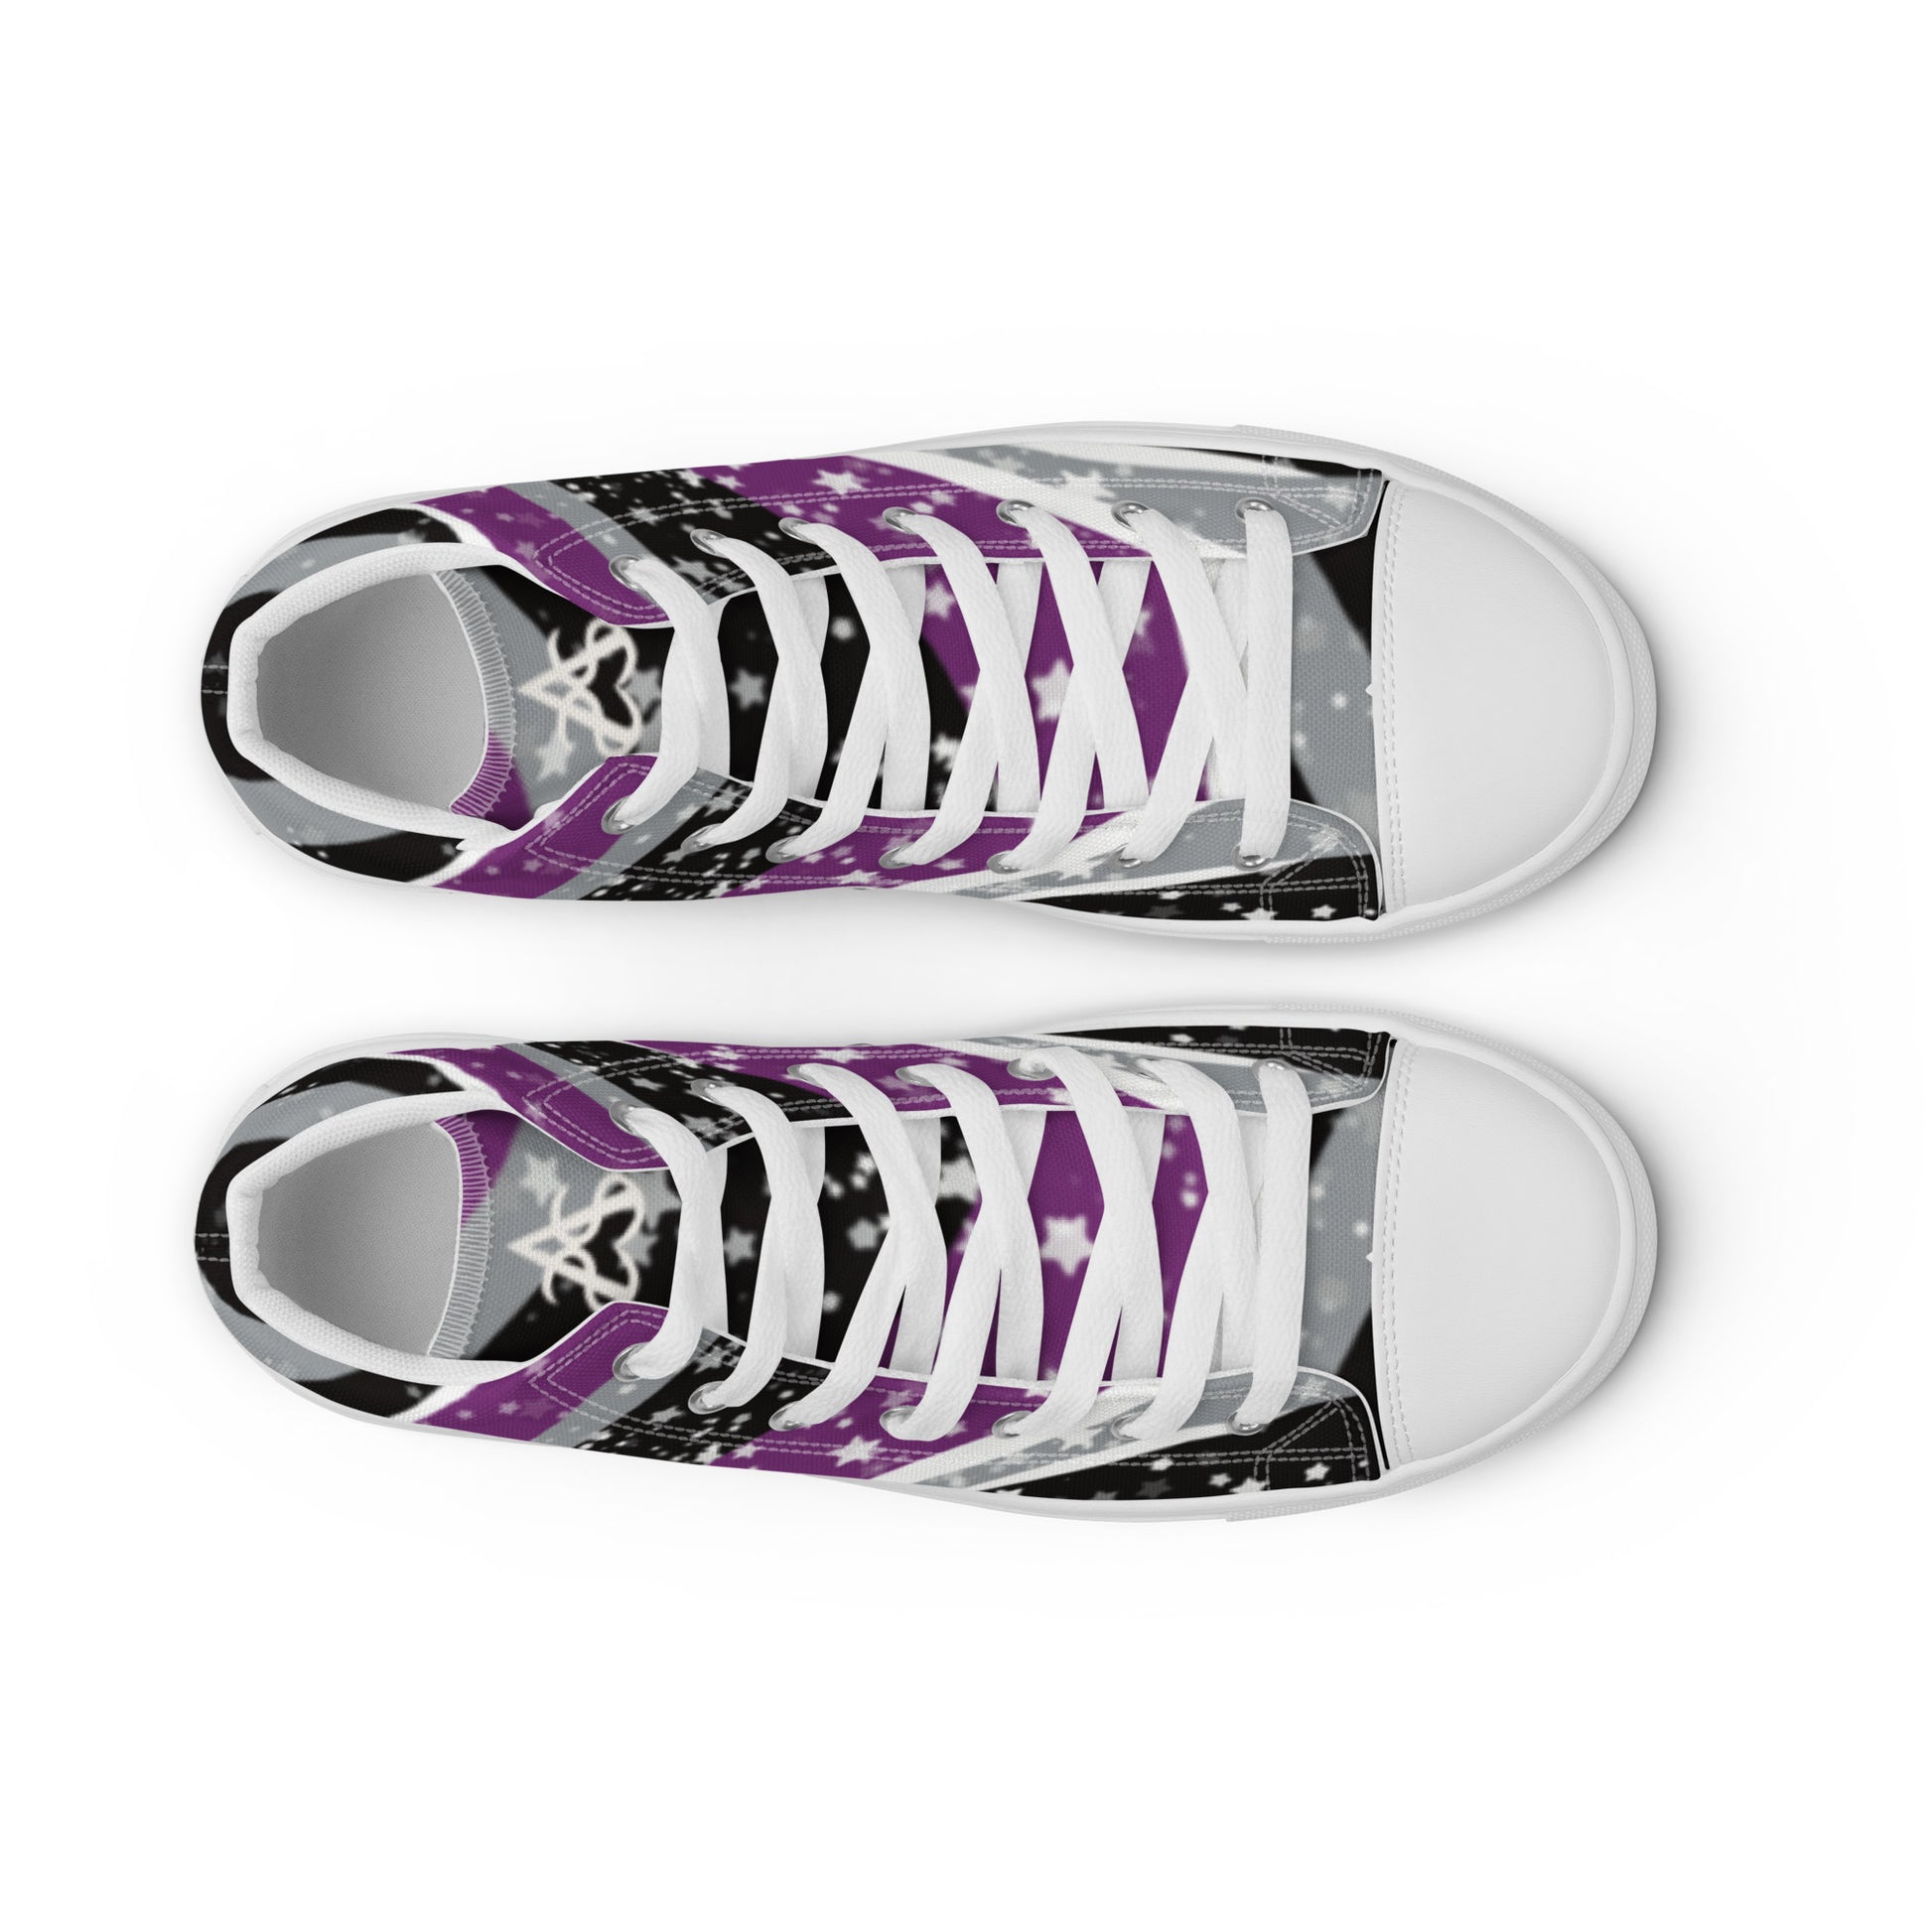 Top view: a pair of high-top shoes with ribbons of purple, grey, black, and white seem to expand from the heel to the laces with an explosion of stars.